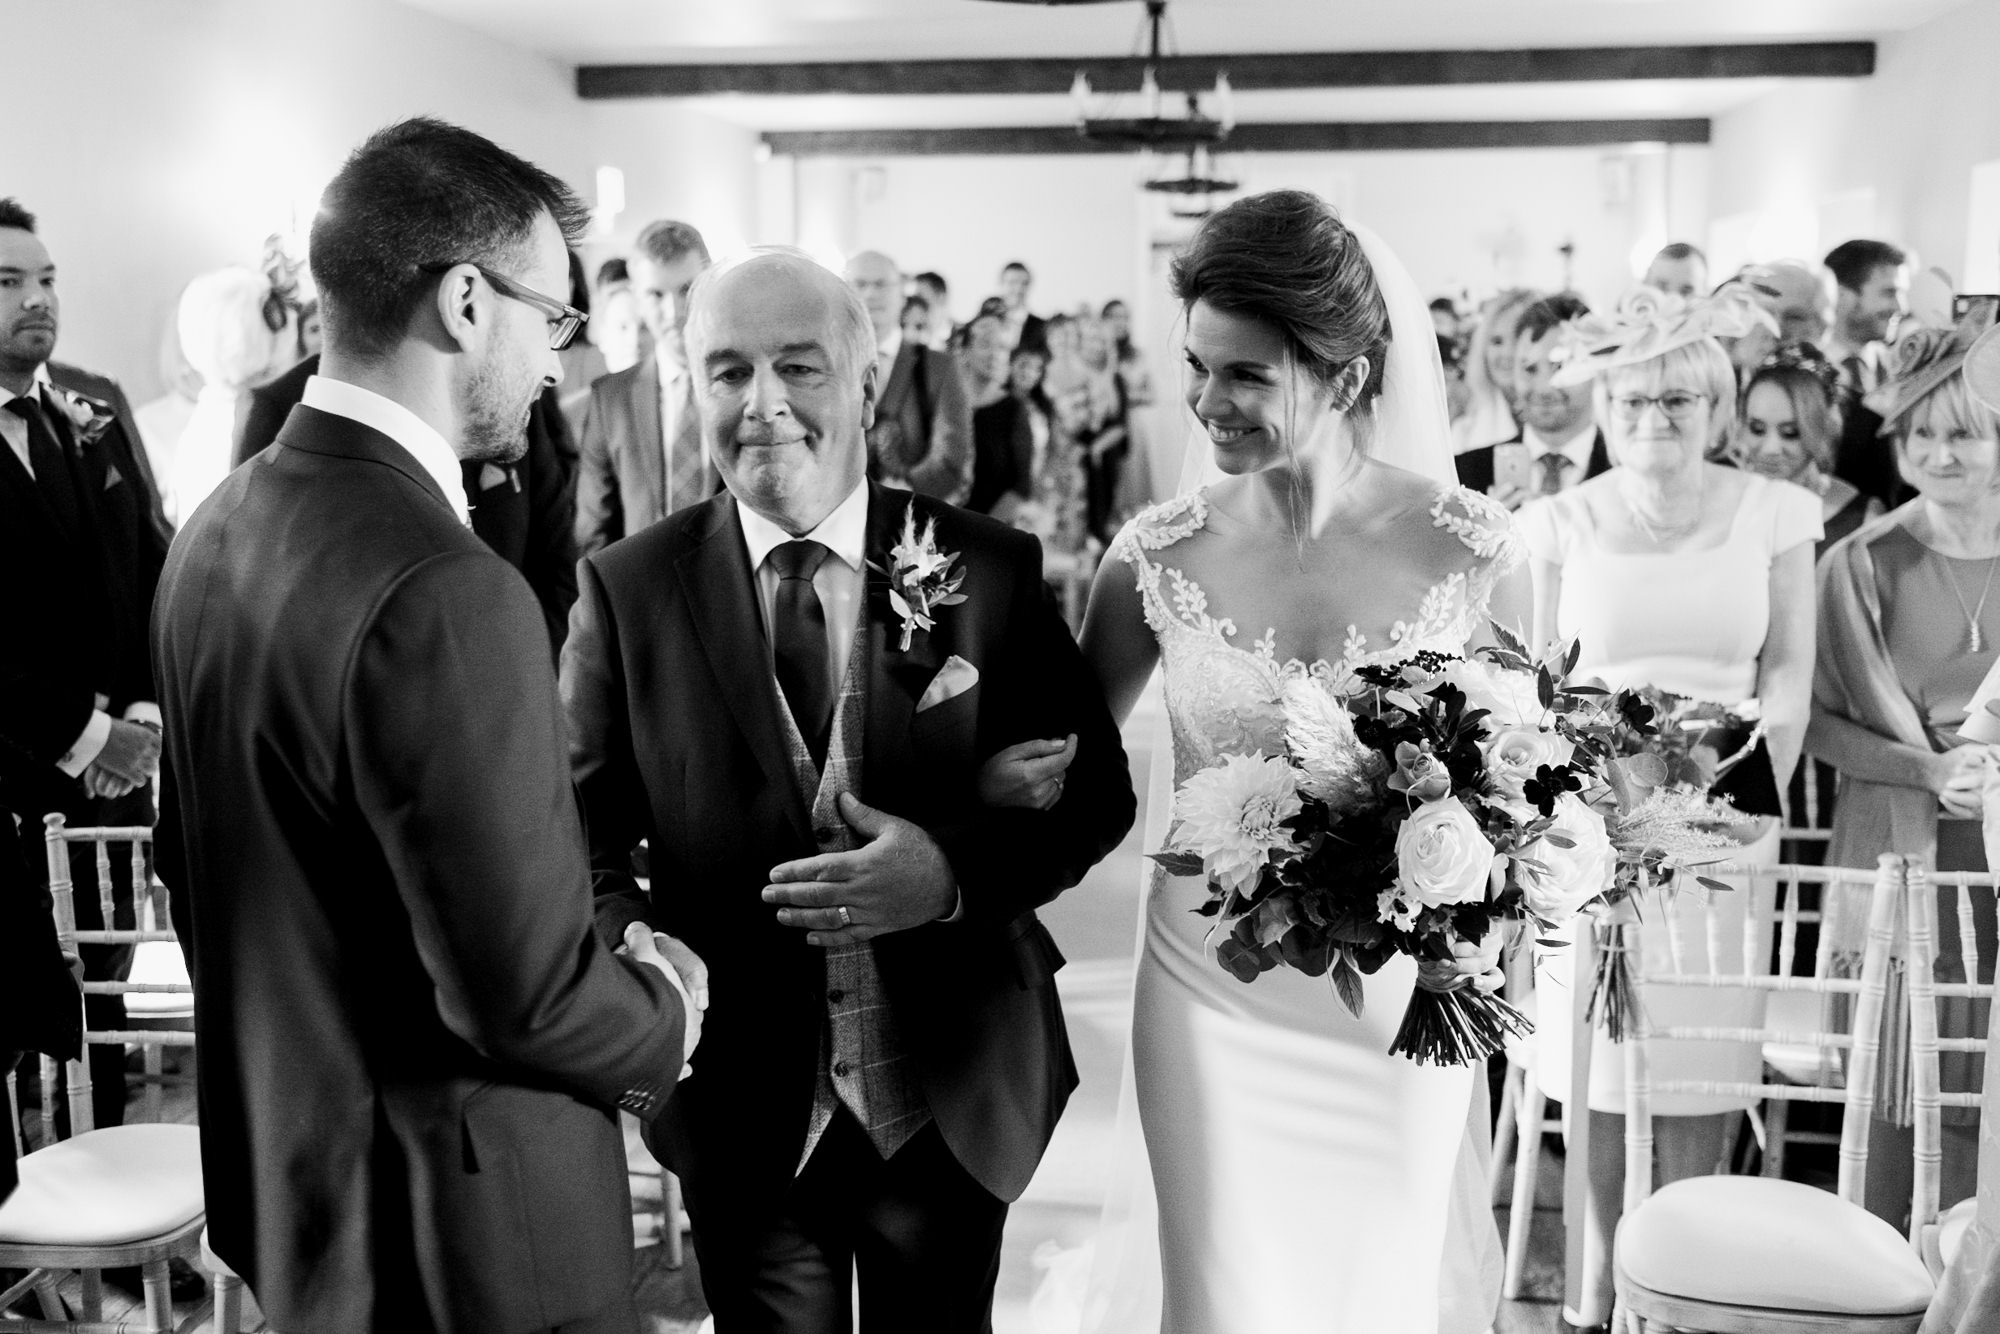 father of bride shakes grooms hand at top of aisle as bride smiles on